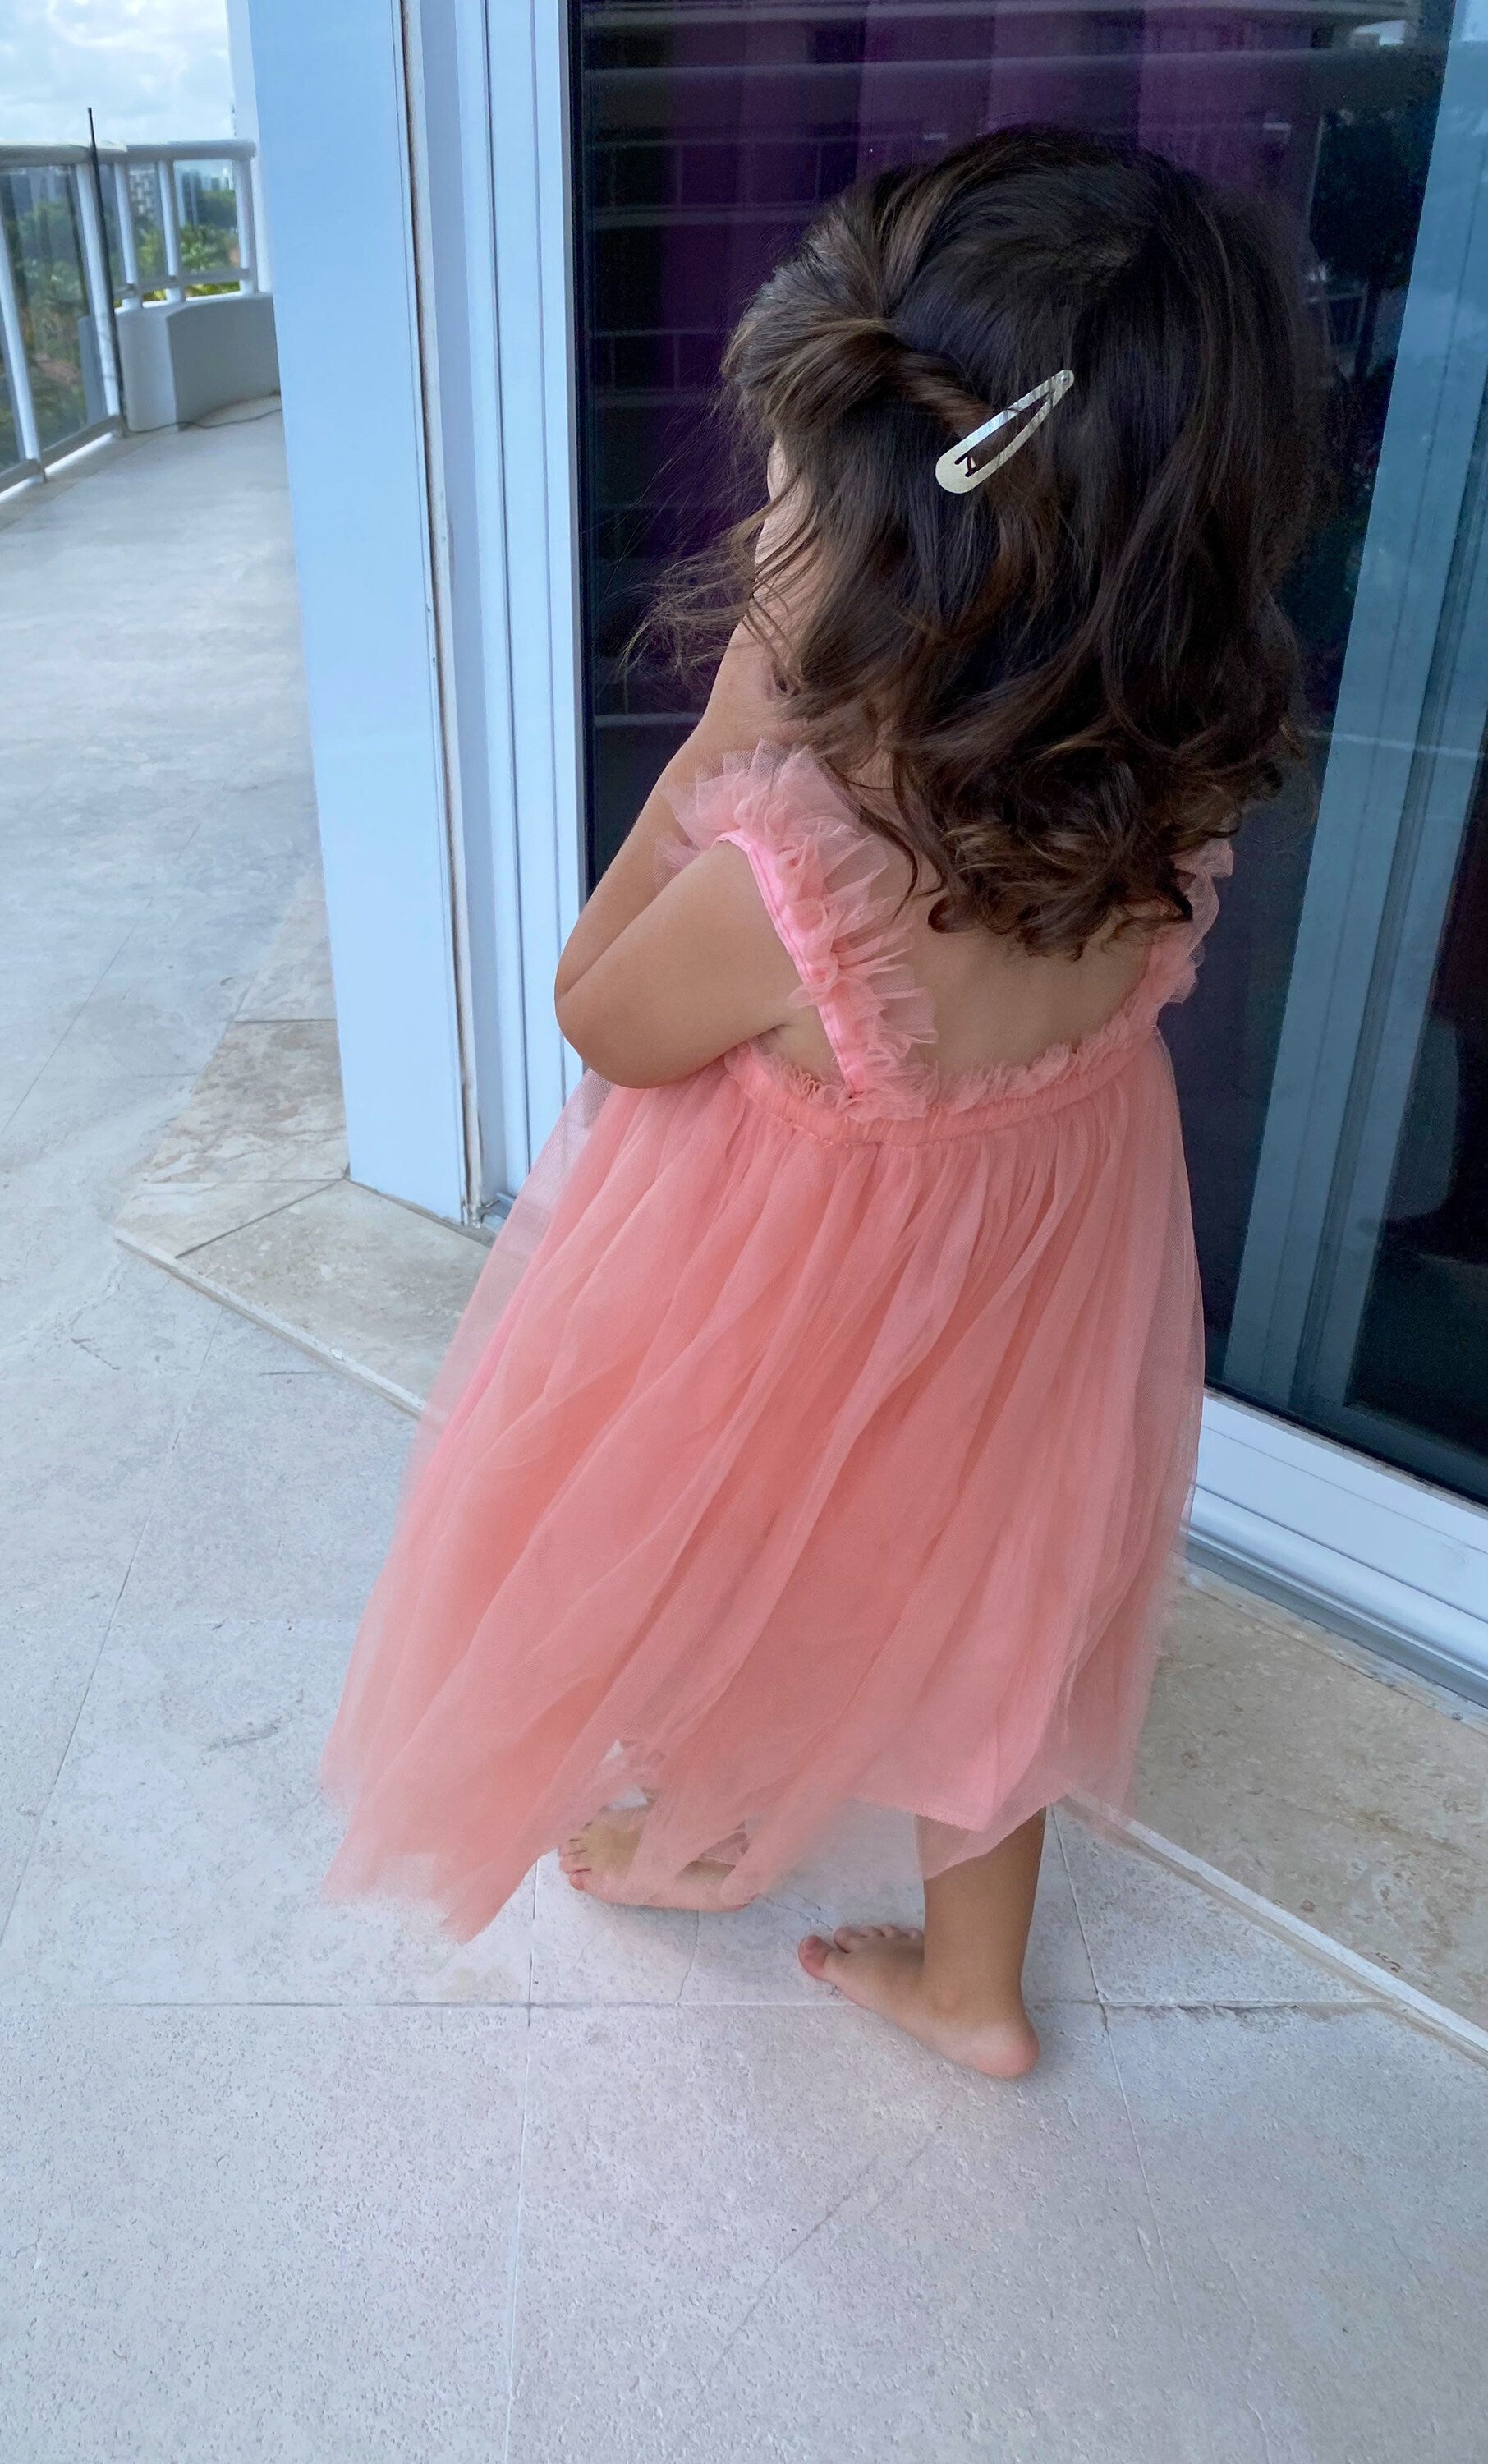 Pink  Baby Tulle Dress